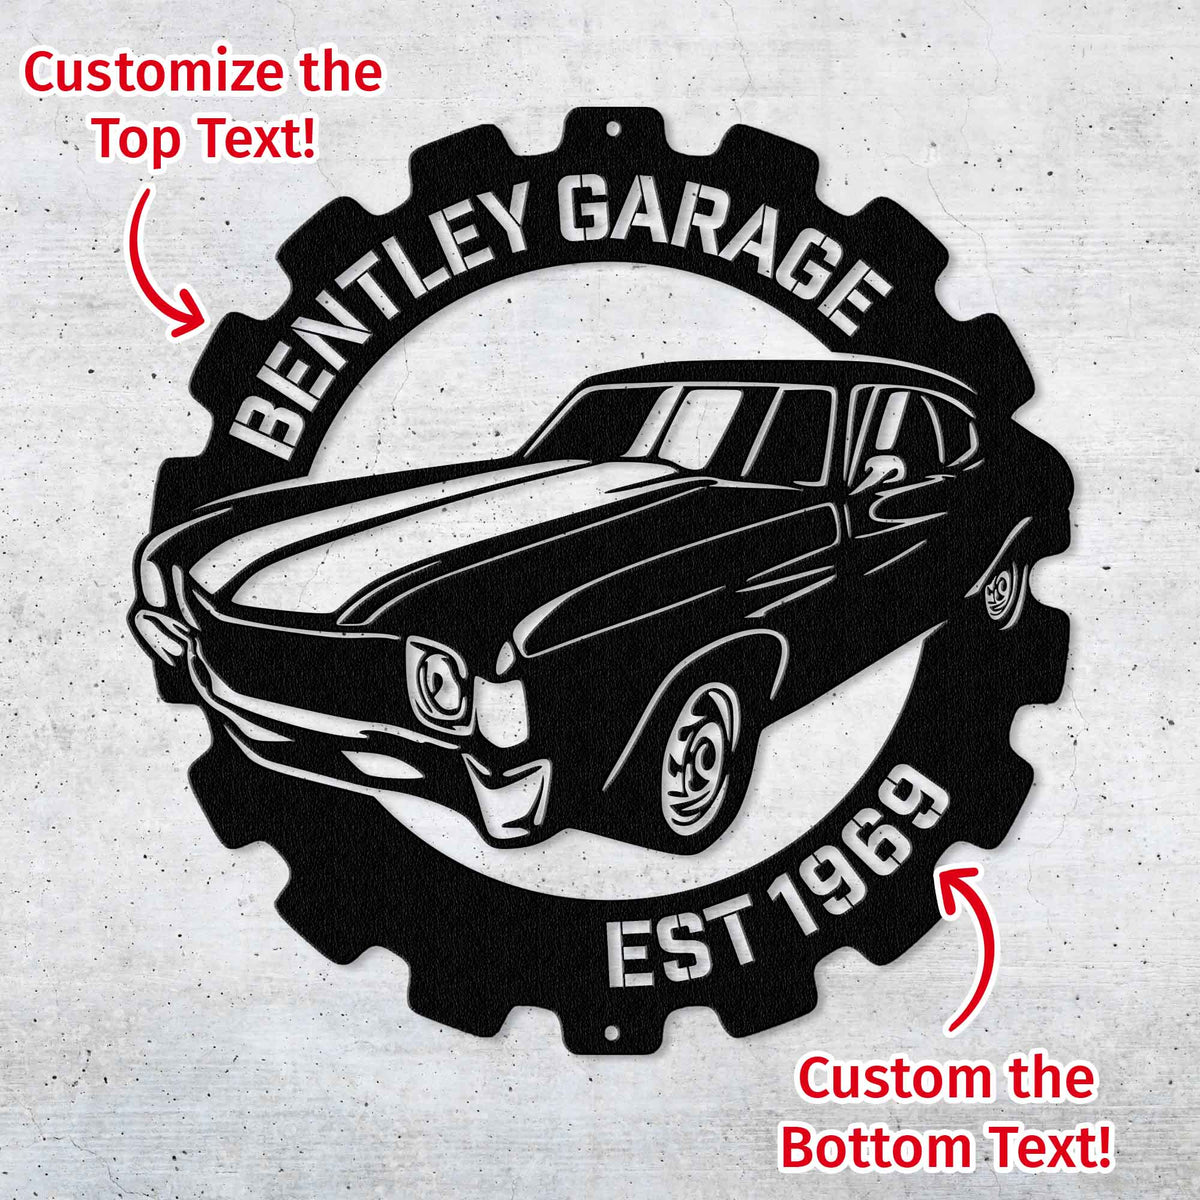 Classic Muscle Car Garage Sign - Personalized Metal Wall Art Metal Art - Throttle Mania